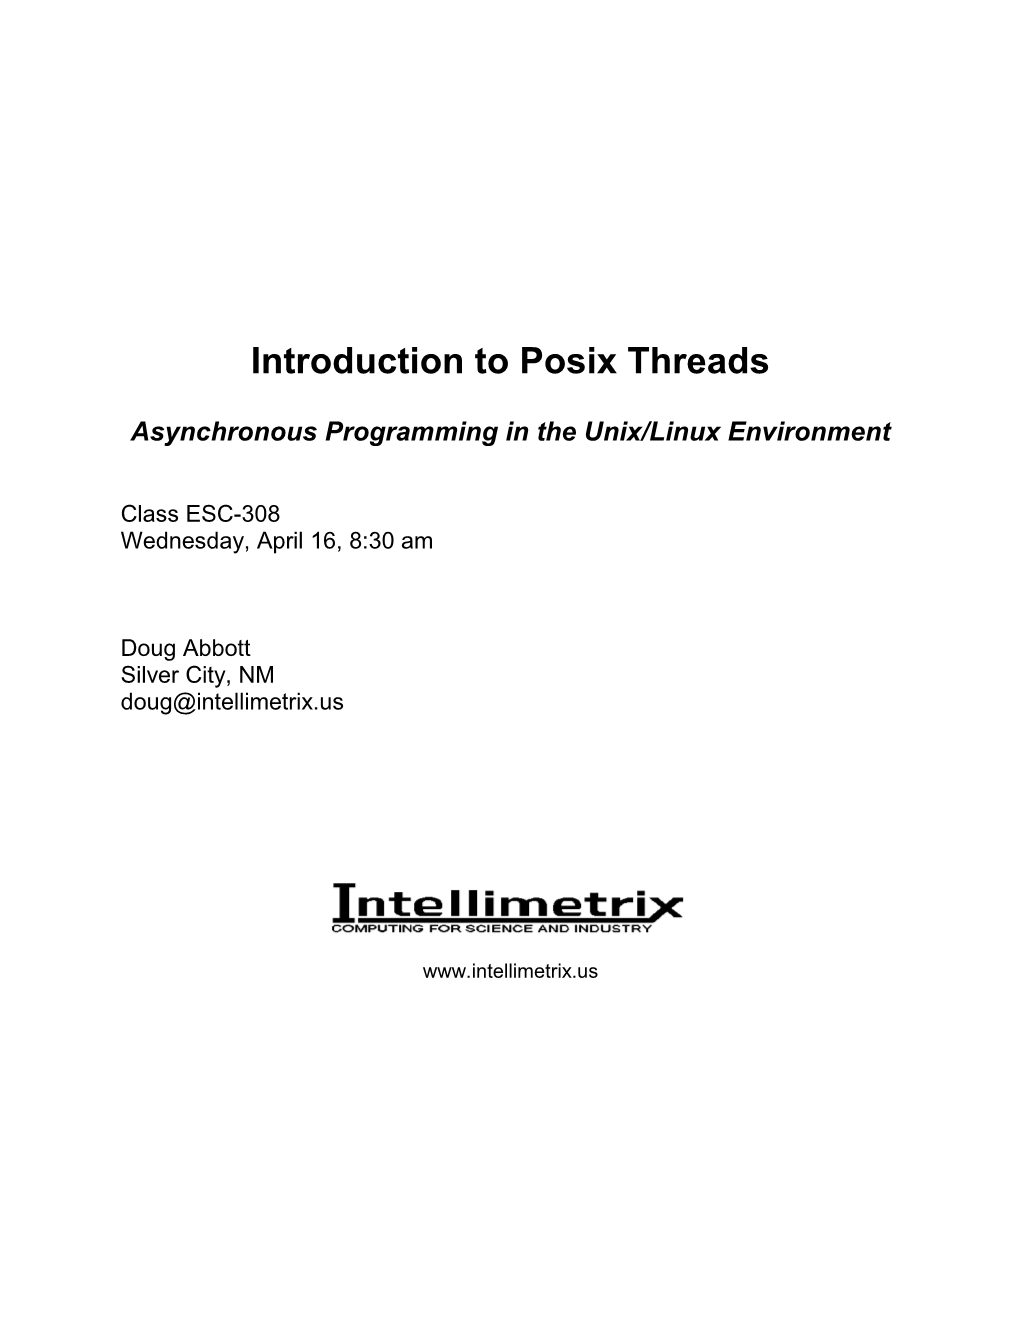 Introduction to Posix Threads